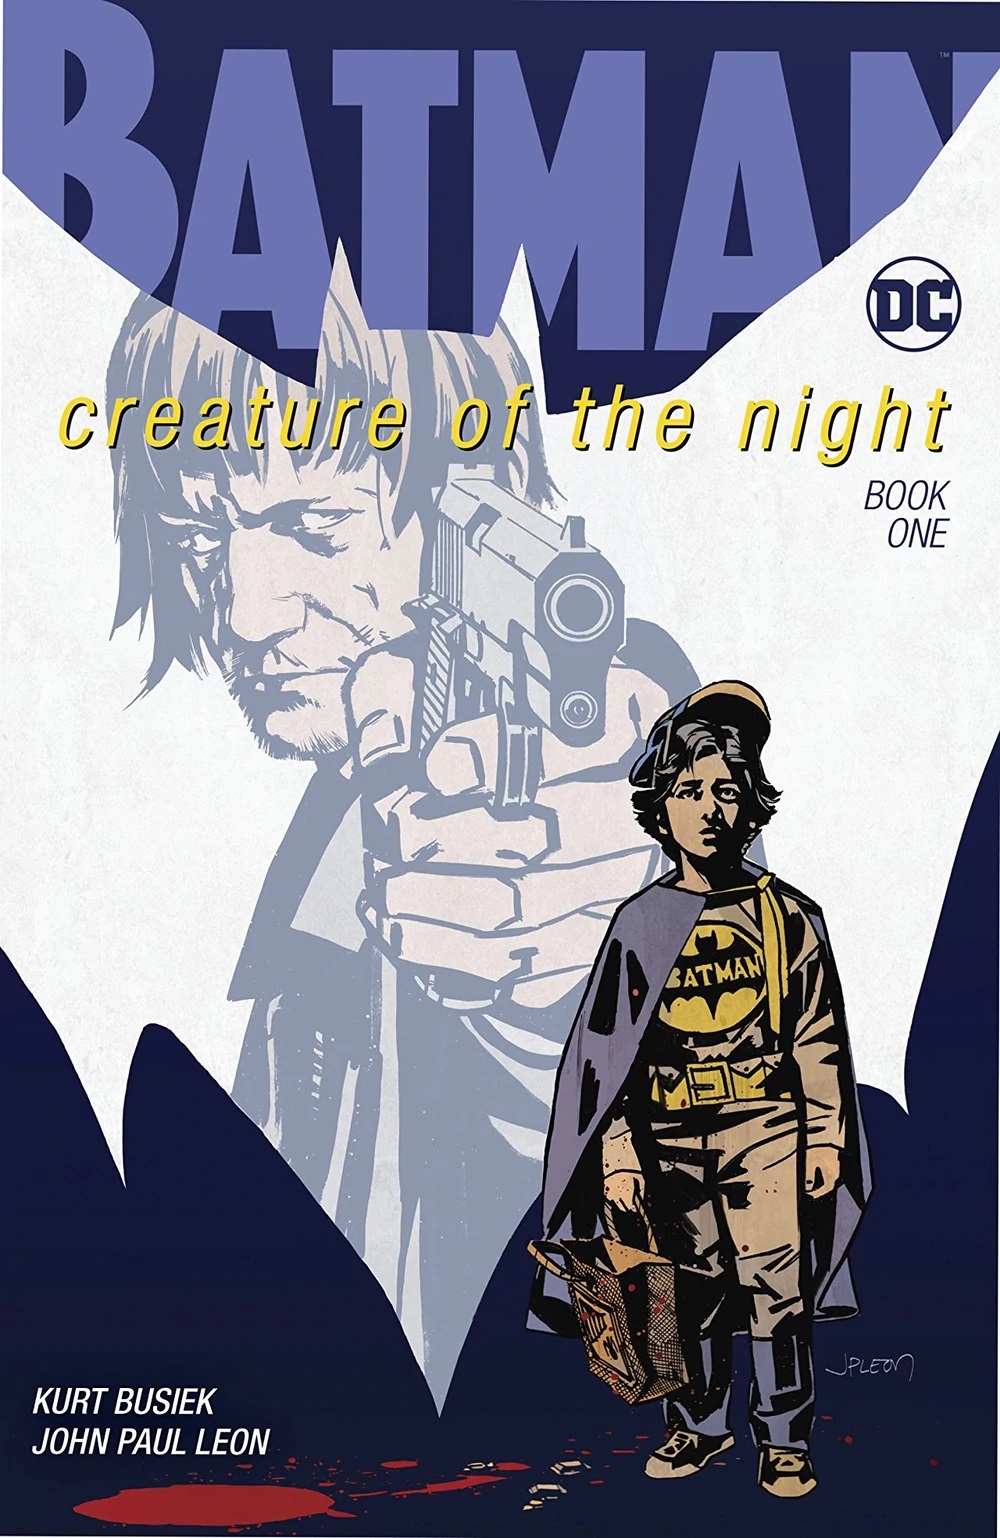 Batman: Creature of The Night Limited Series Bundle Issues 1-4